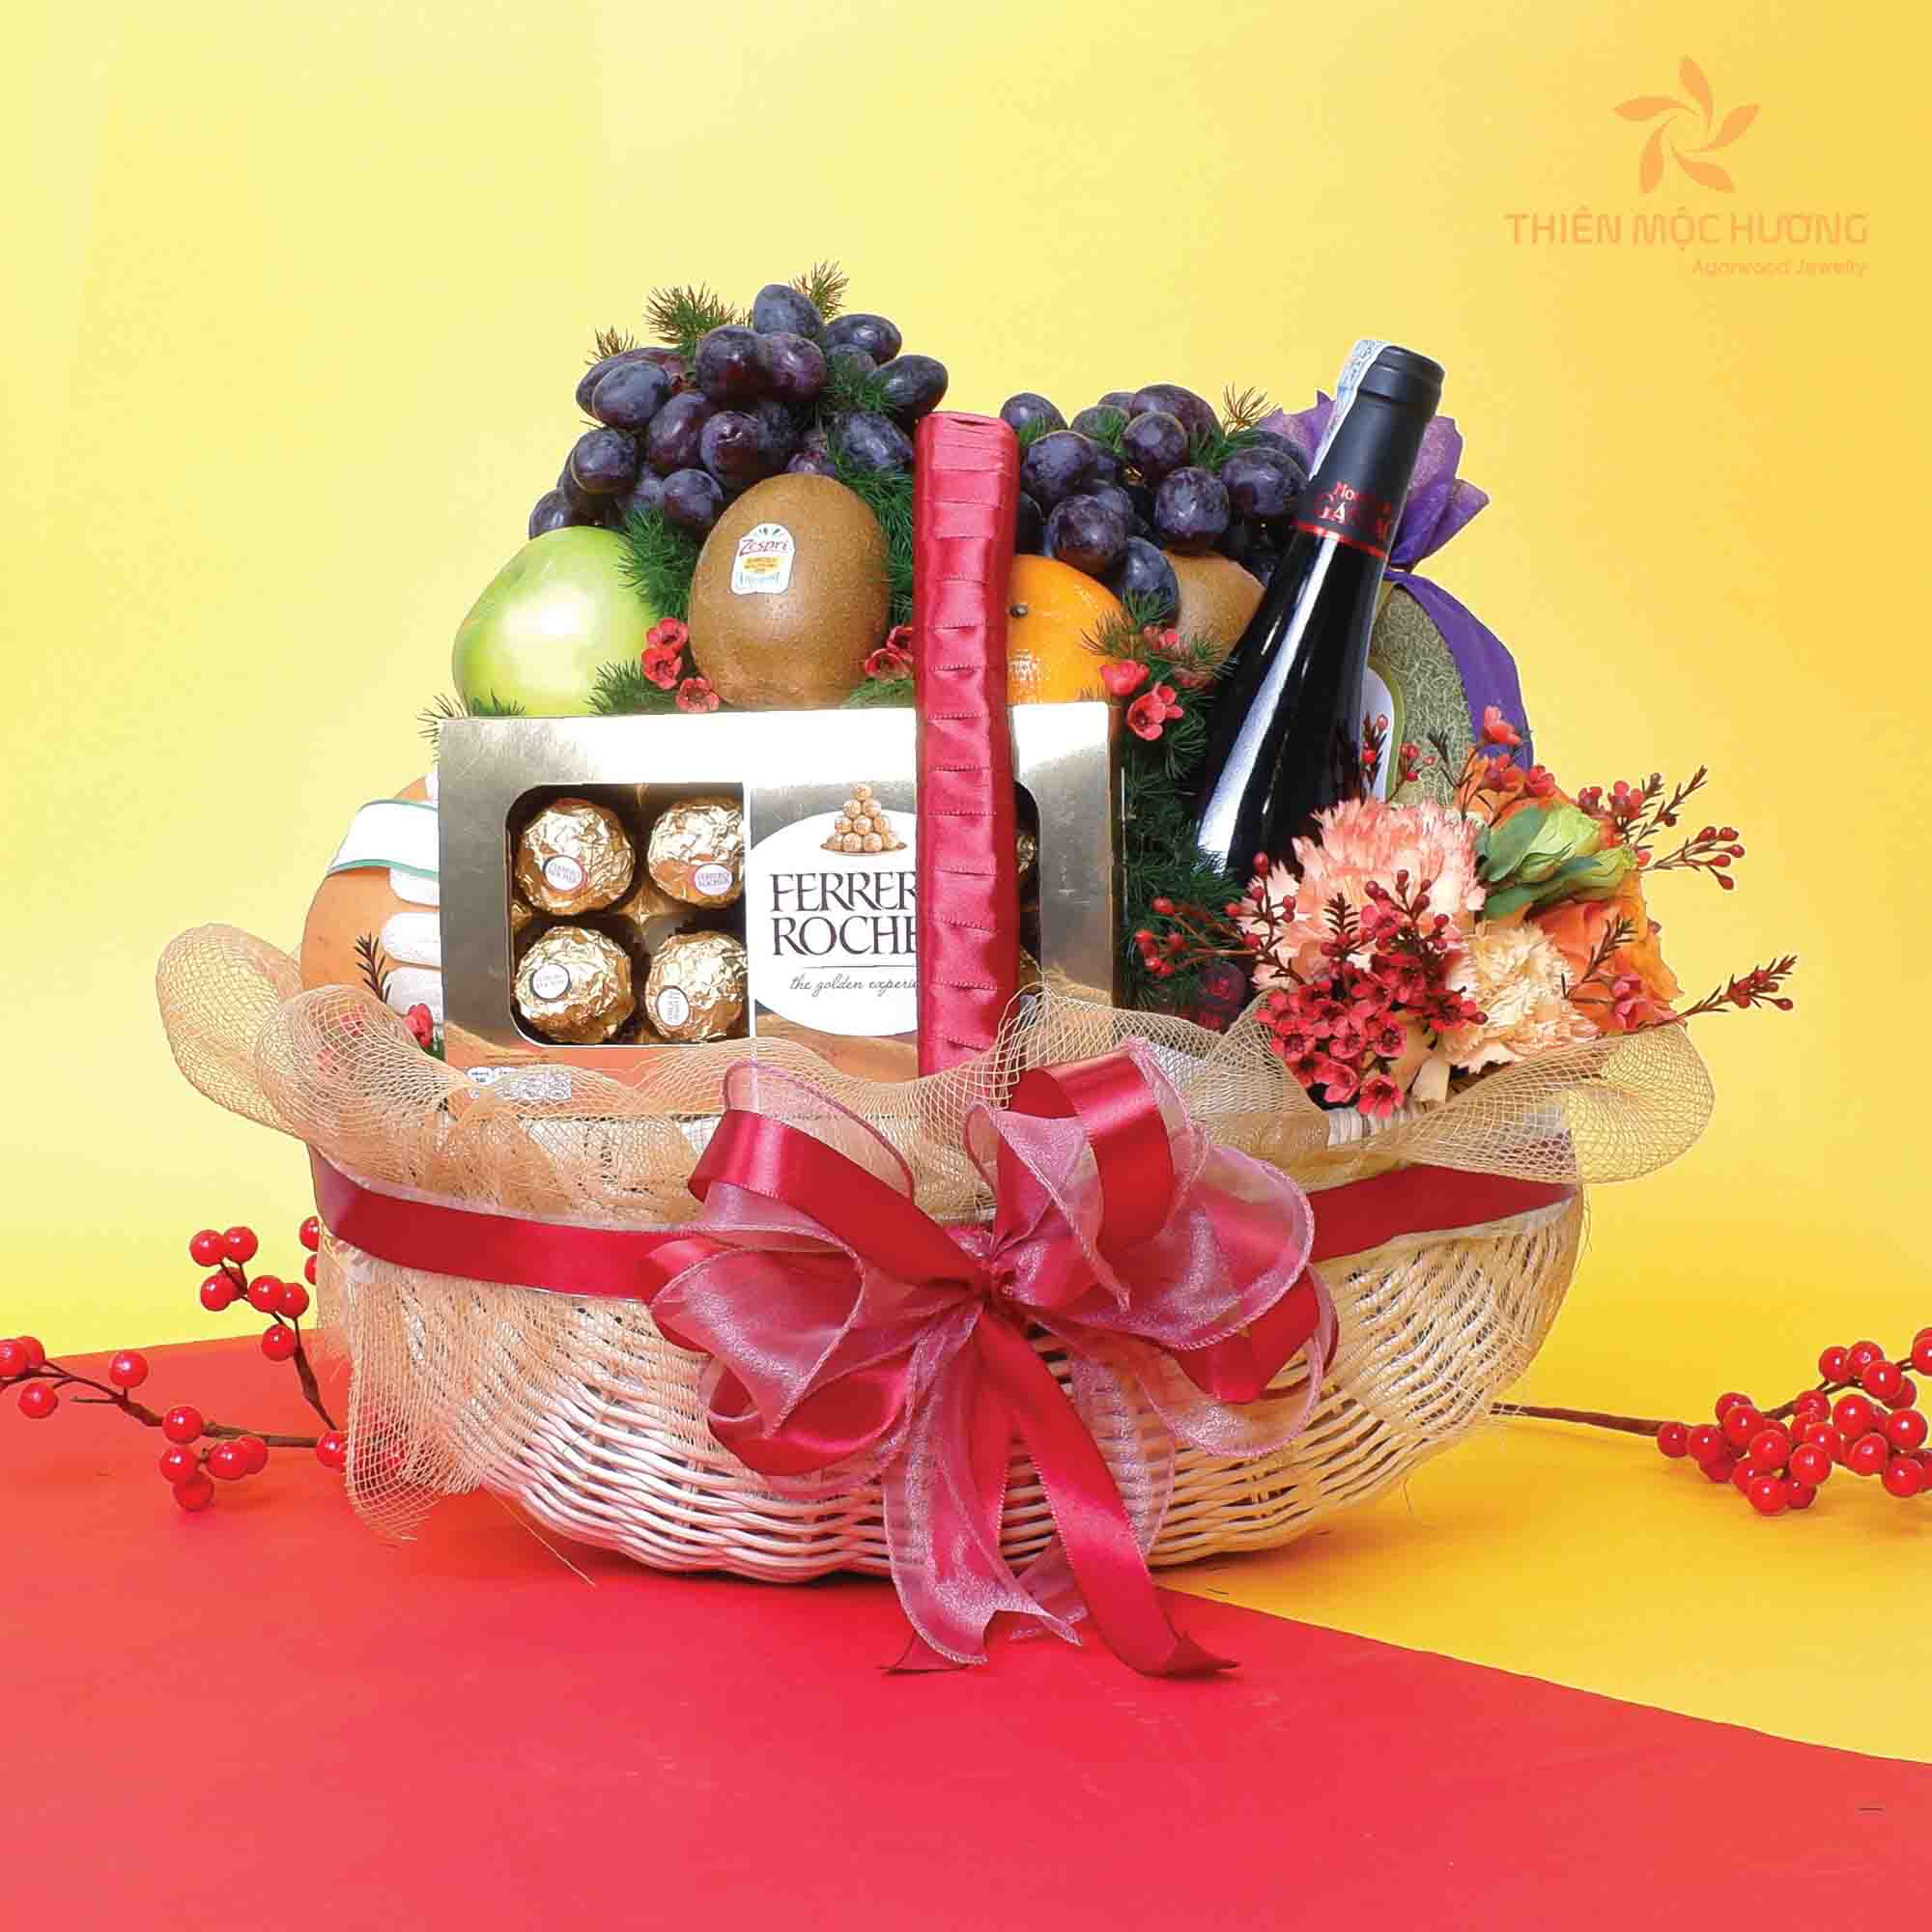 Top Vietnamese New Year Gift Ideas - Traditional Fruits